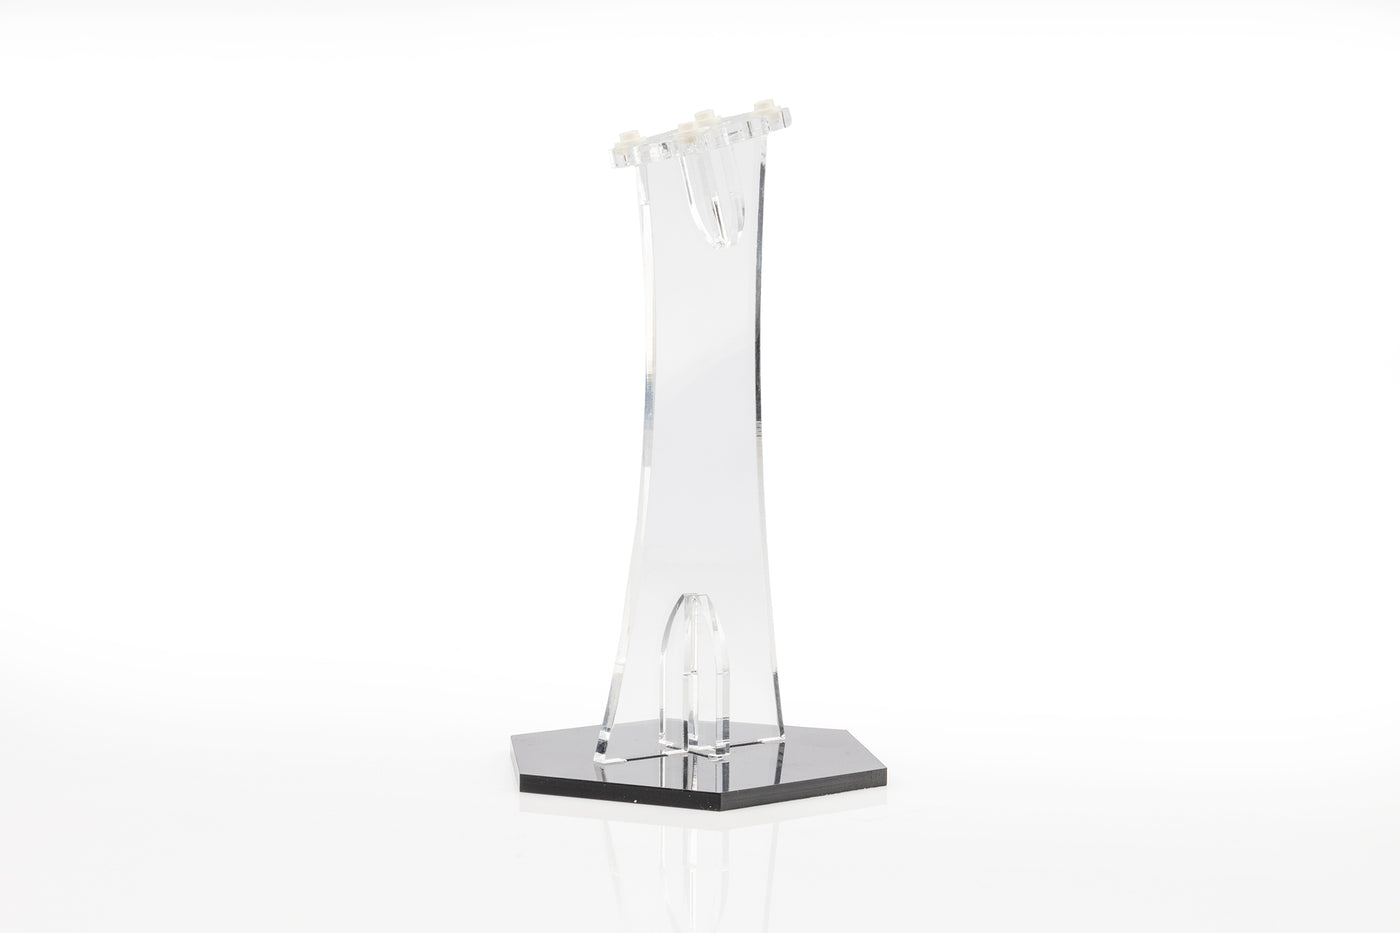 LEGO UCS Imperial Star Destroyer Clear Acrylic Display Stand